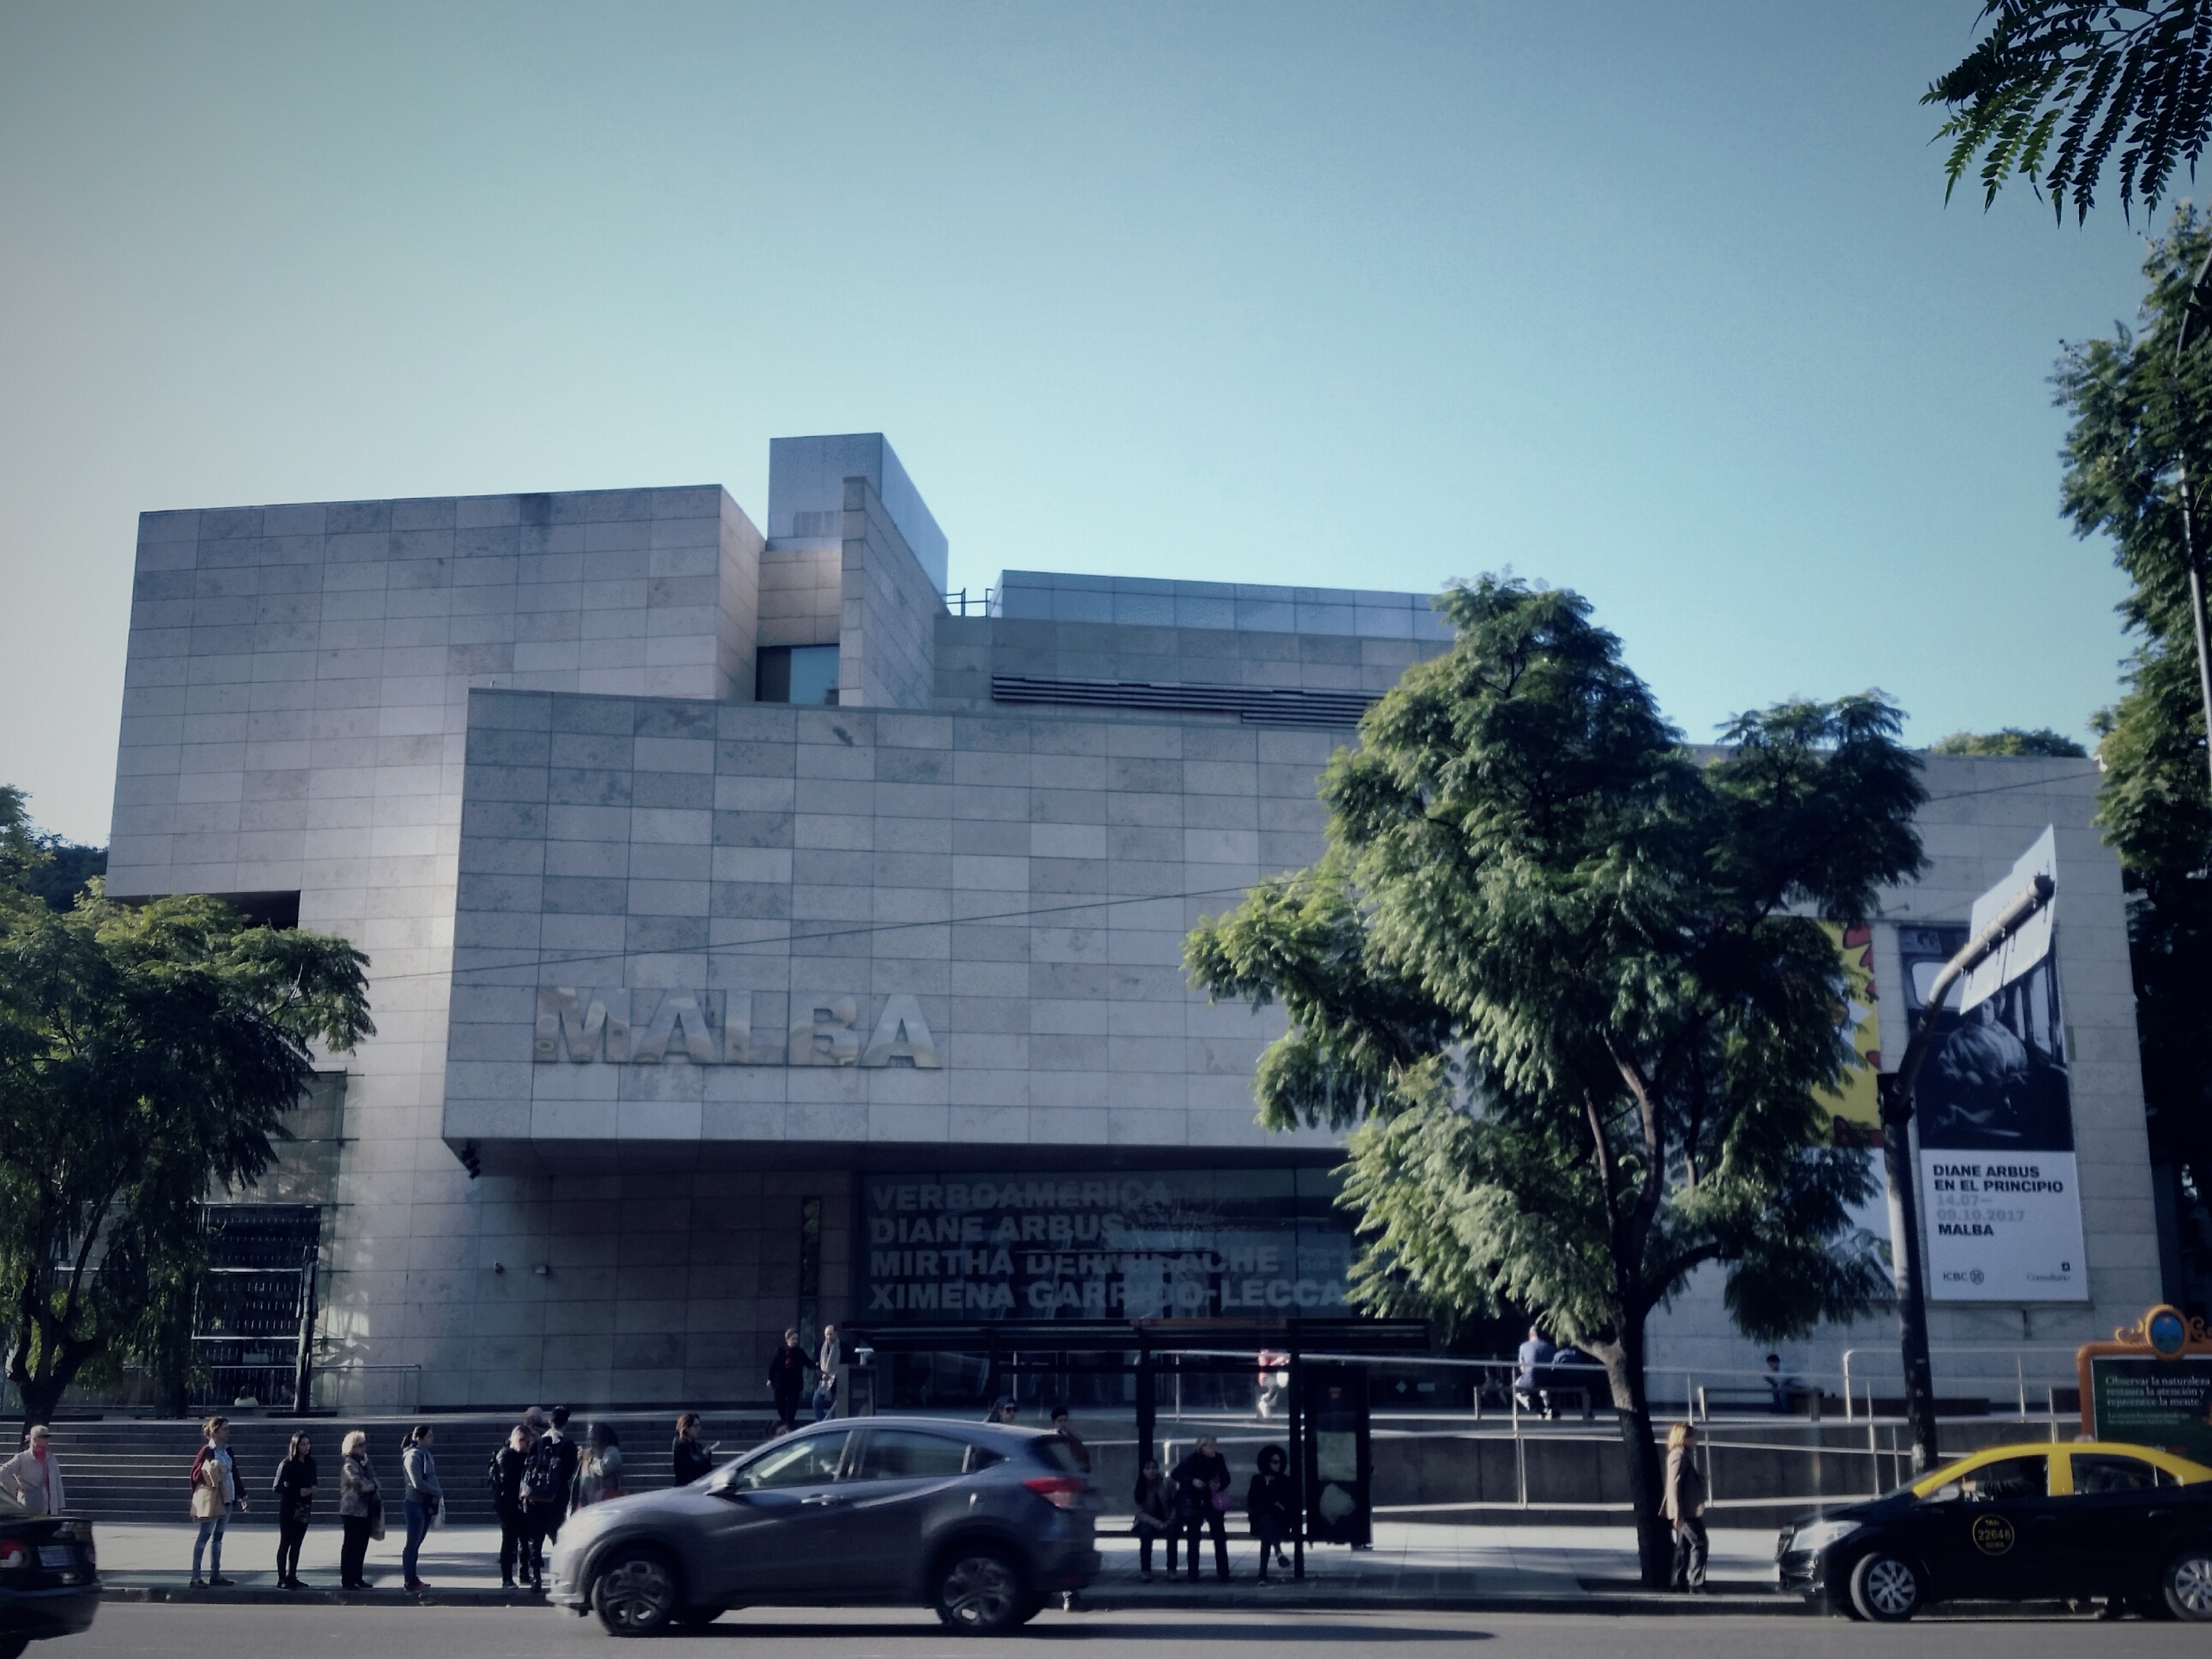 MALBA - The Latin American Art Museum of Buenos Aires